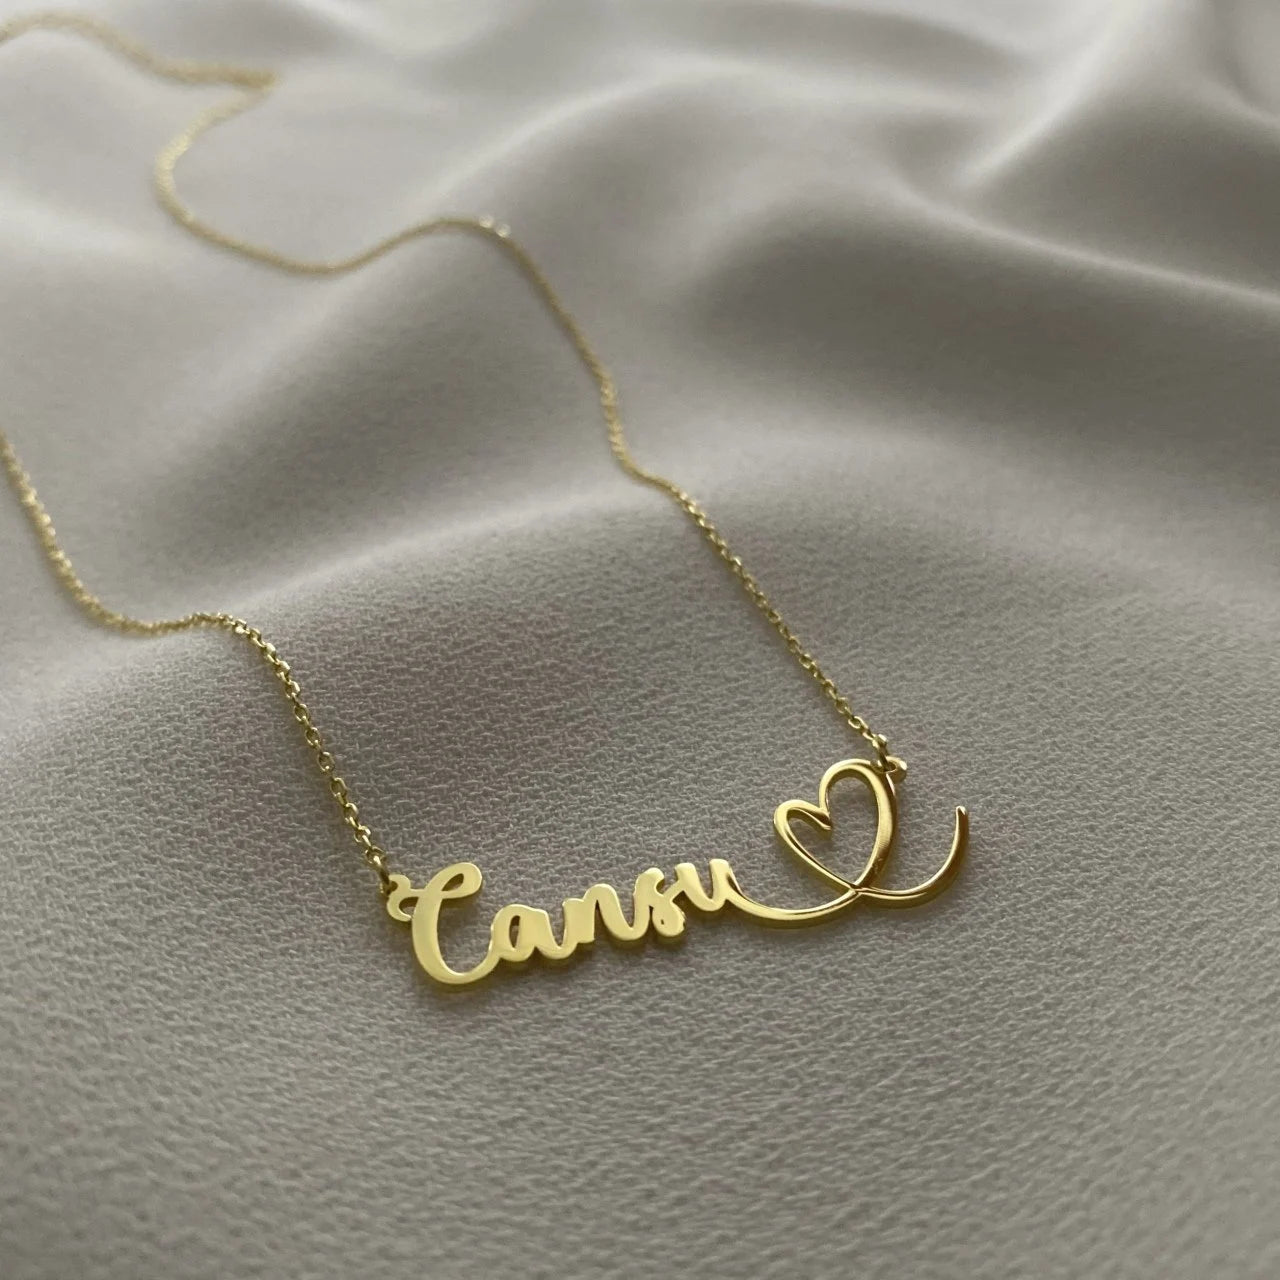 Name Necklace-Customized Necklace-925 Sterling Silver Necklace